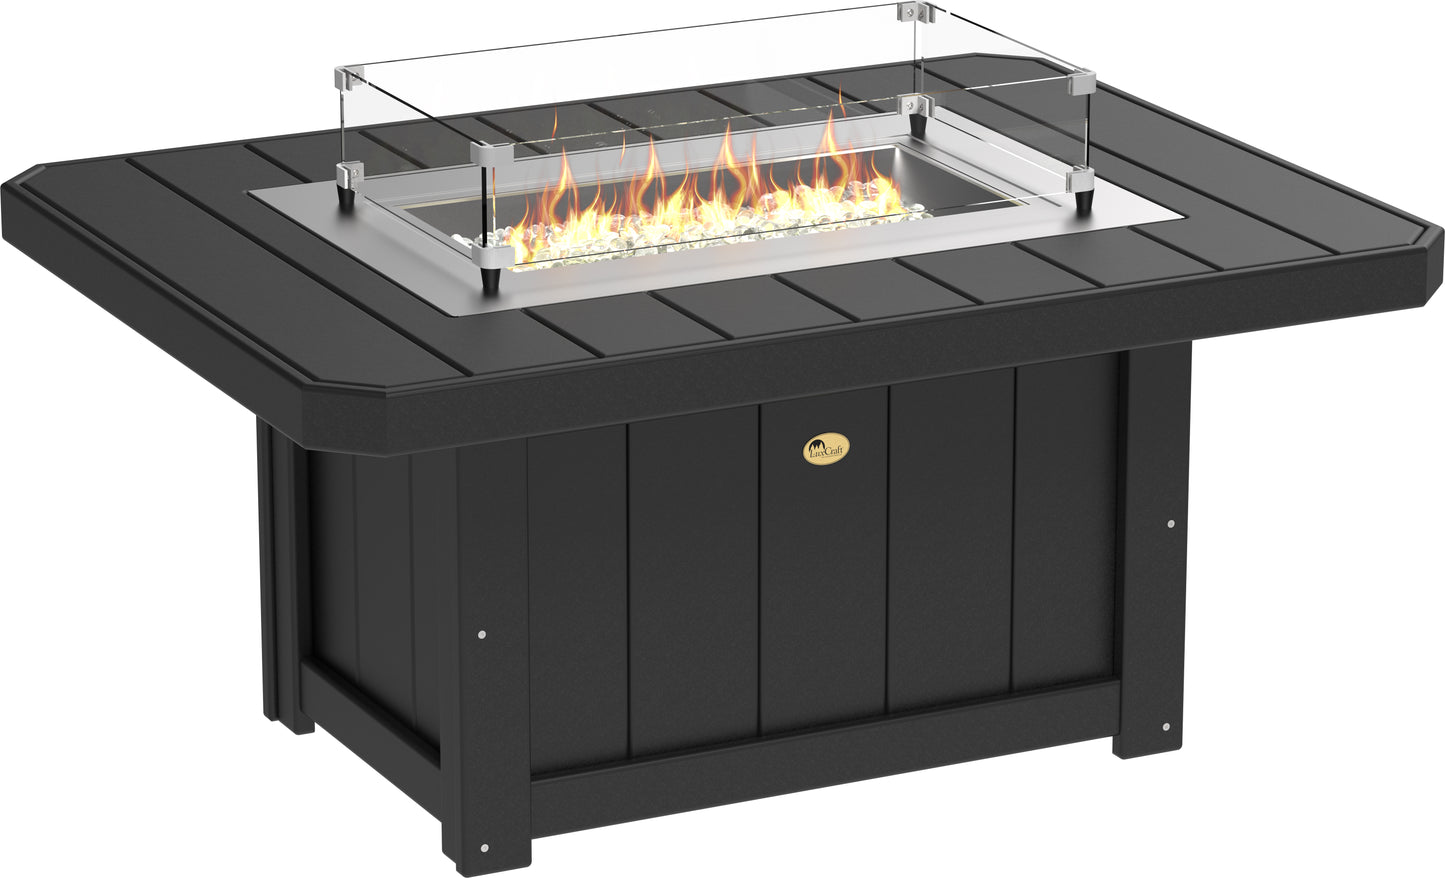 LuxCraft Recycled Plastic Lumin 51" Rectangular Fire Pit - LEAD TIME TO SHIP 3 TO 4 WEEKS